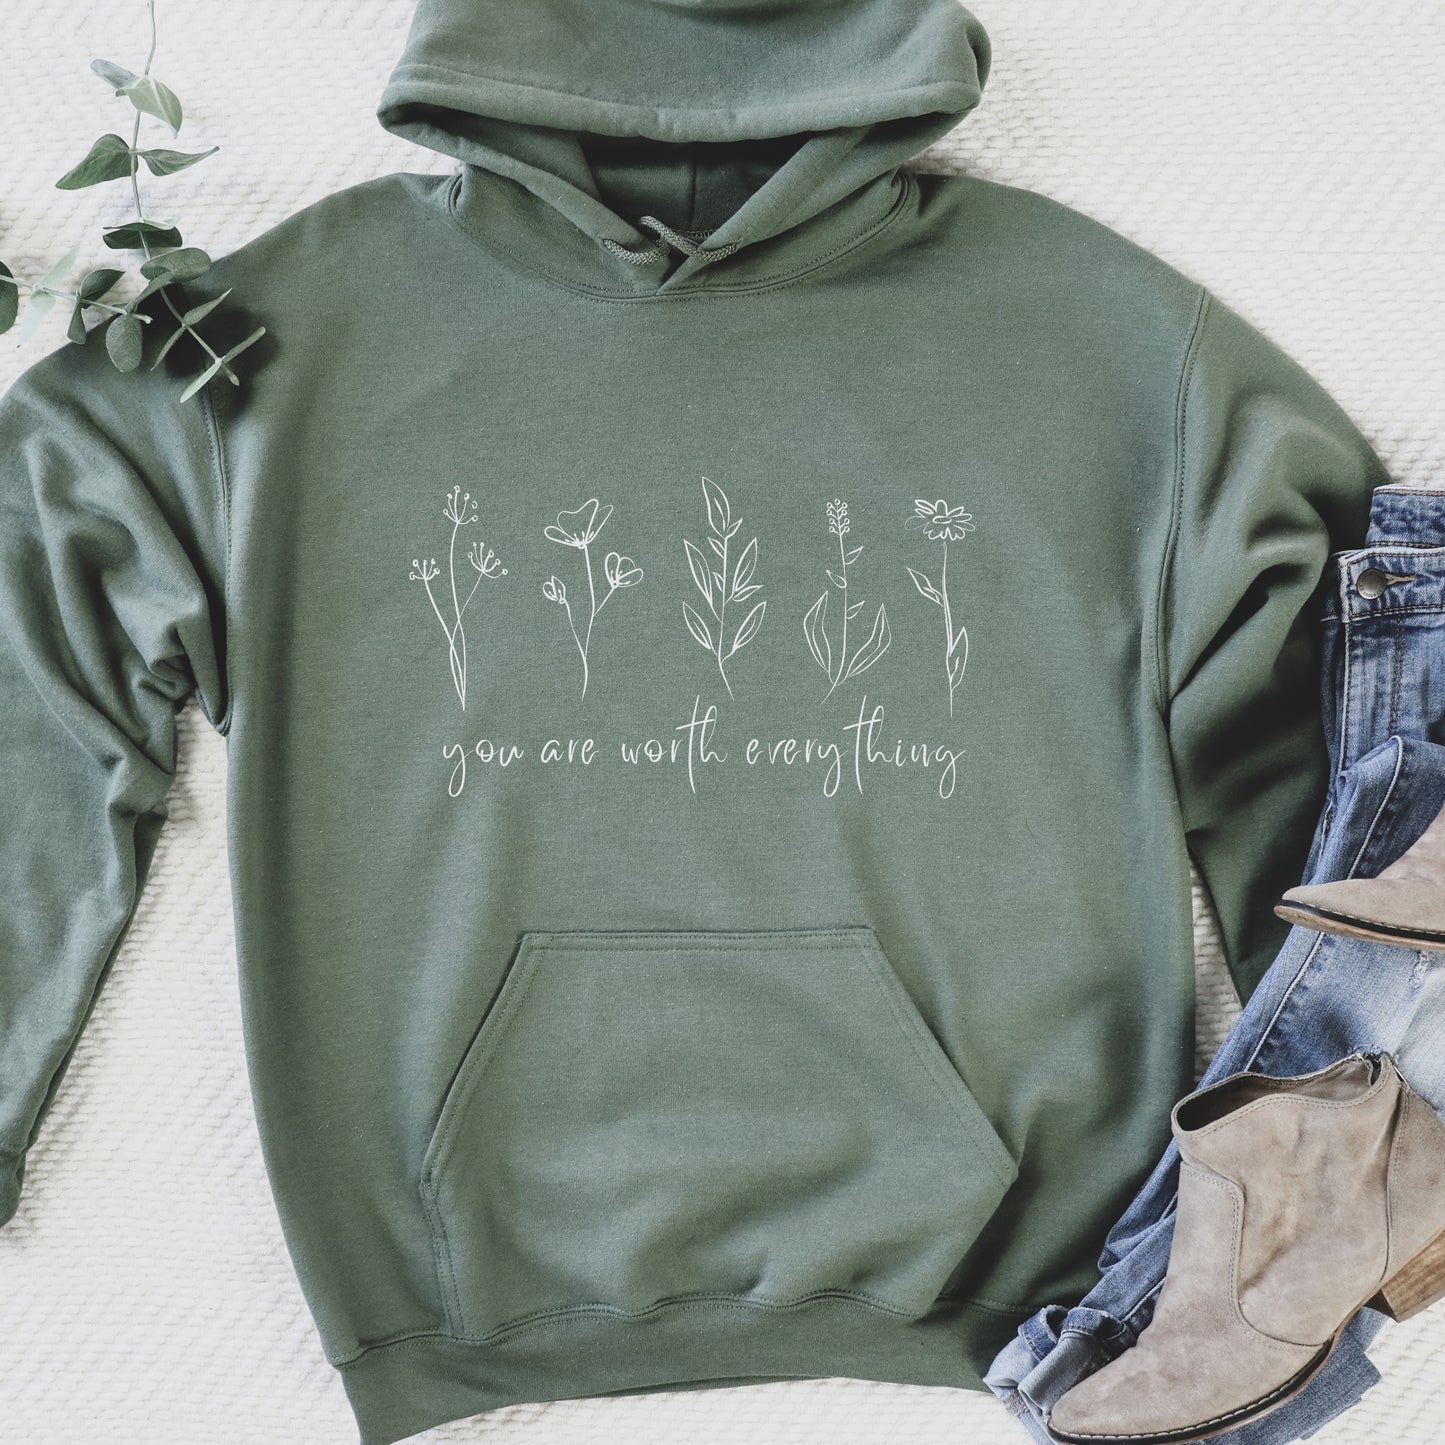 Adorned with beautiful wildflowers graphic and the empowering affirmation message You Are Worth Everything, this Tshirt is a wearable reminder of your inherent value worth and uniqueness.